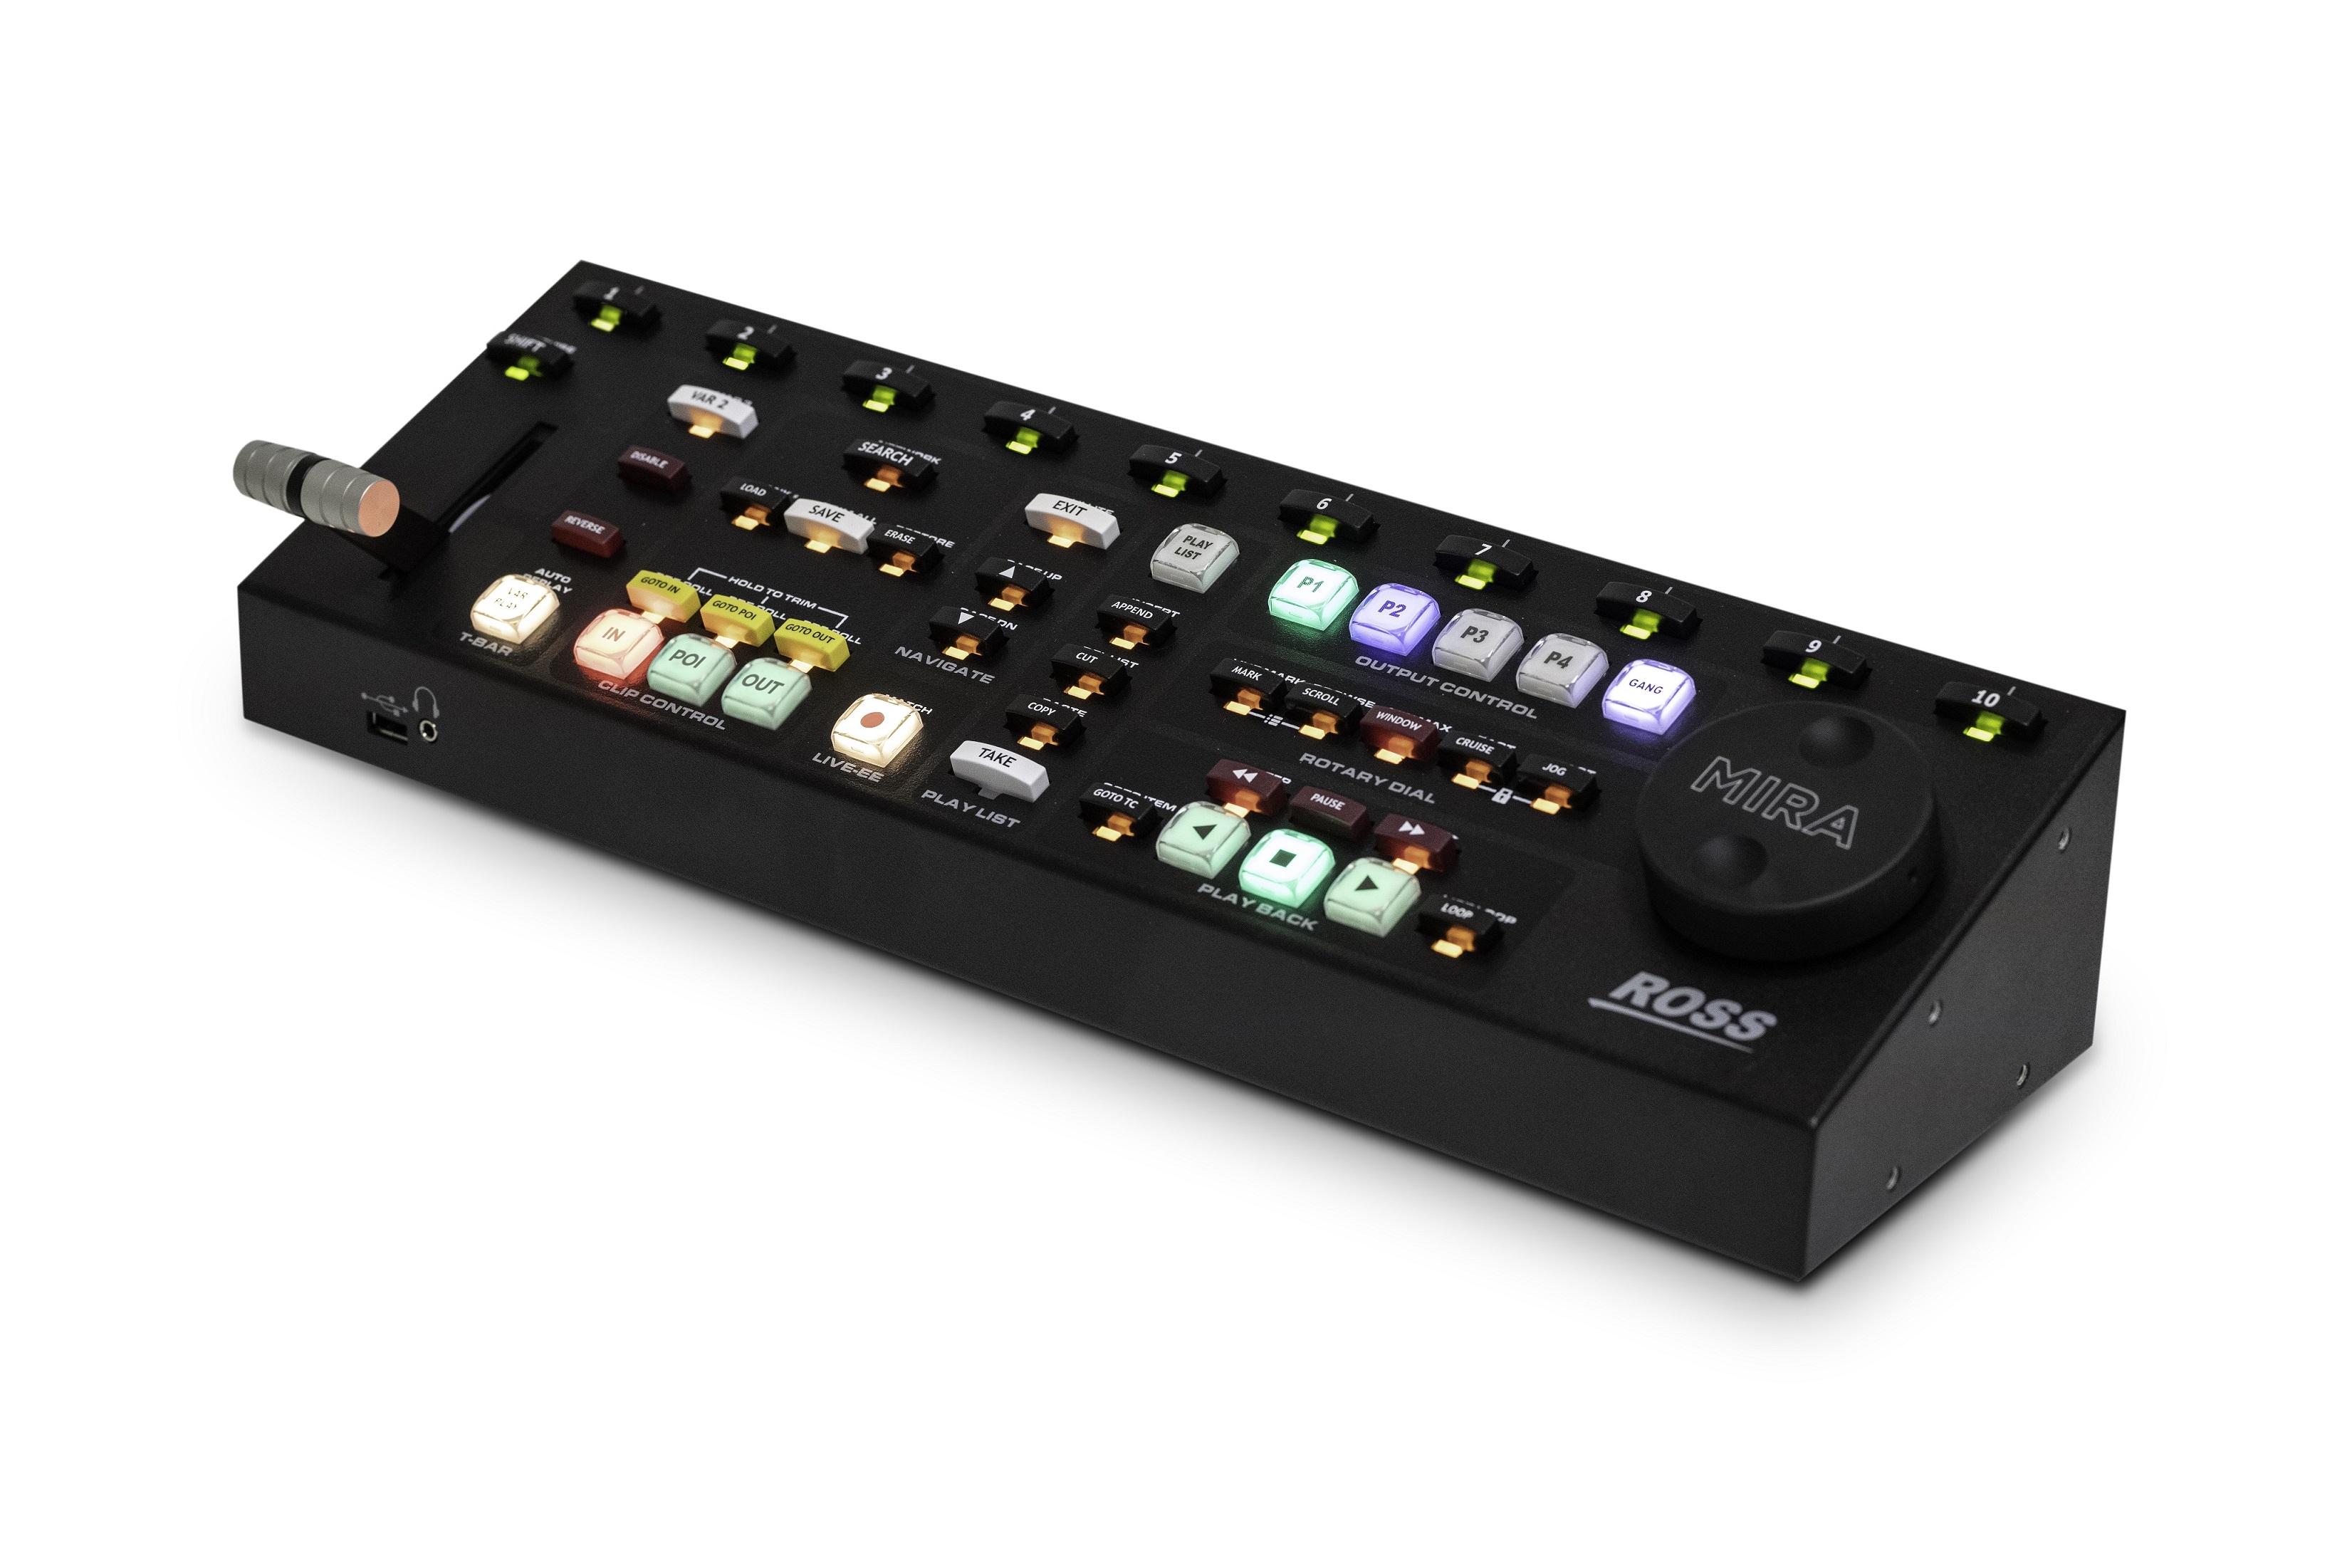 Nab 2019 Ross Video Offers Enhancements To Abekas Product Lines